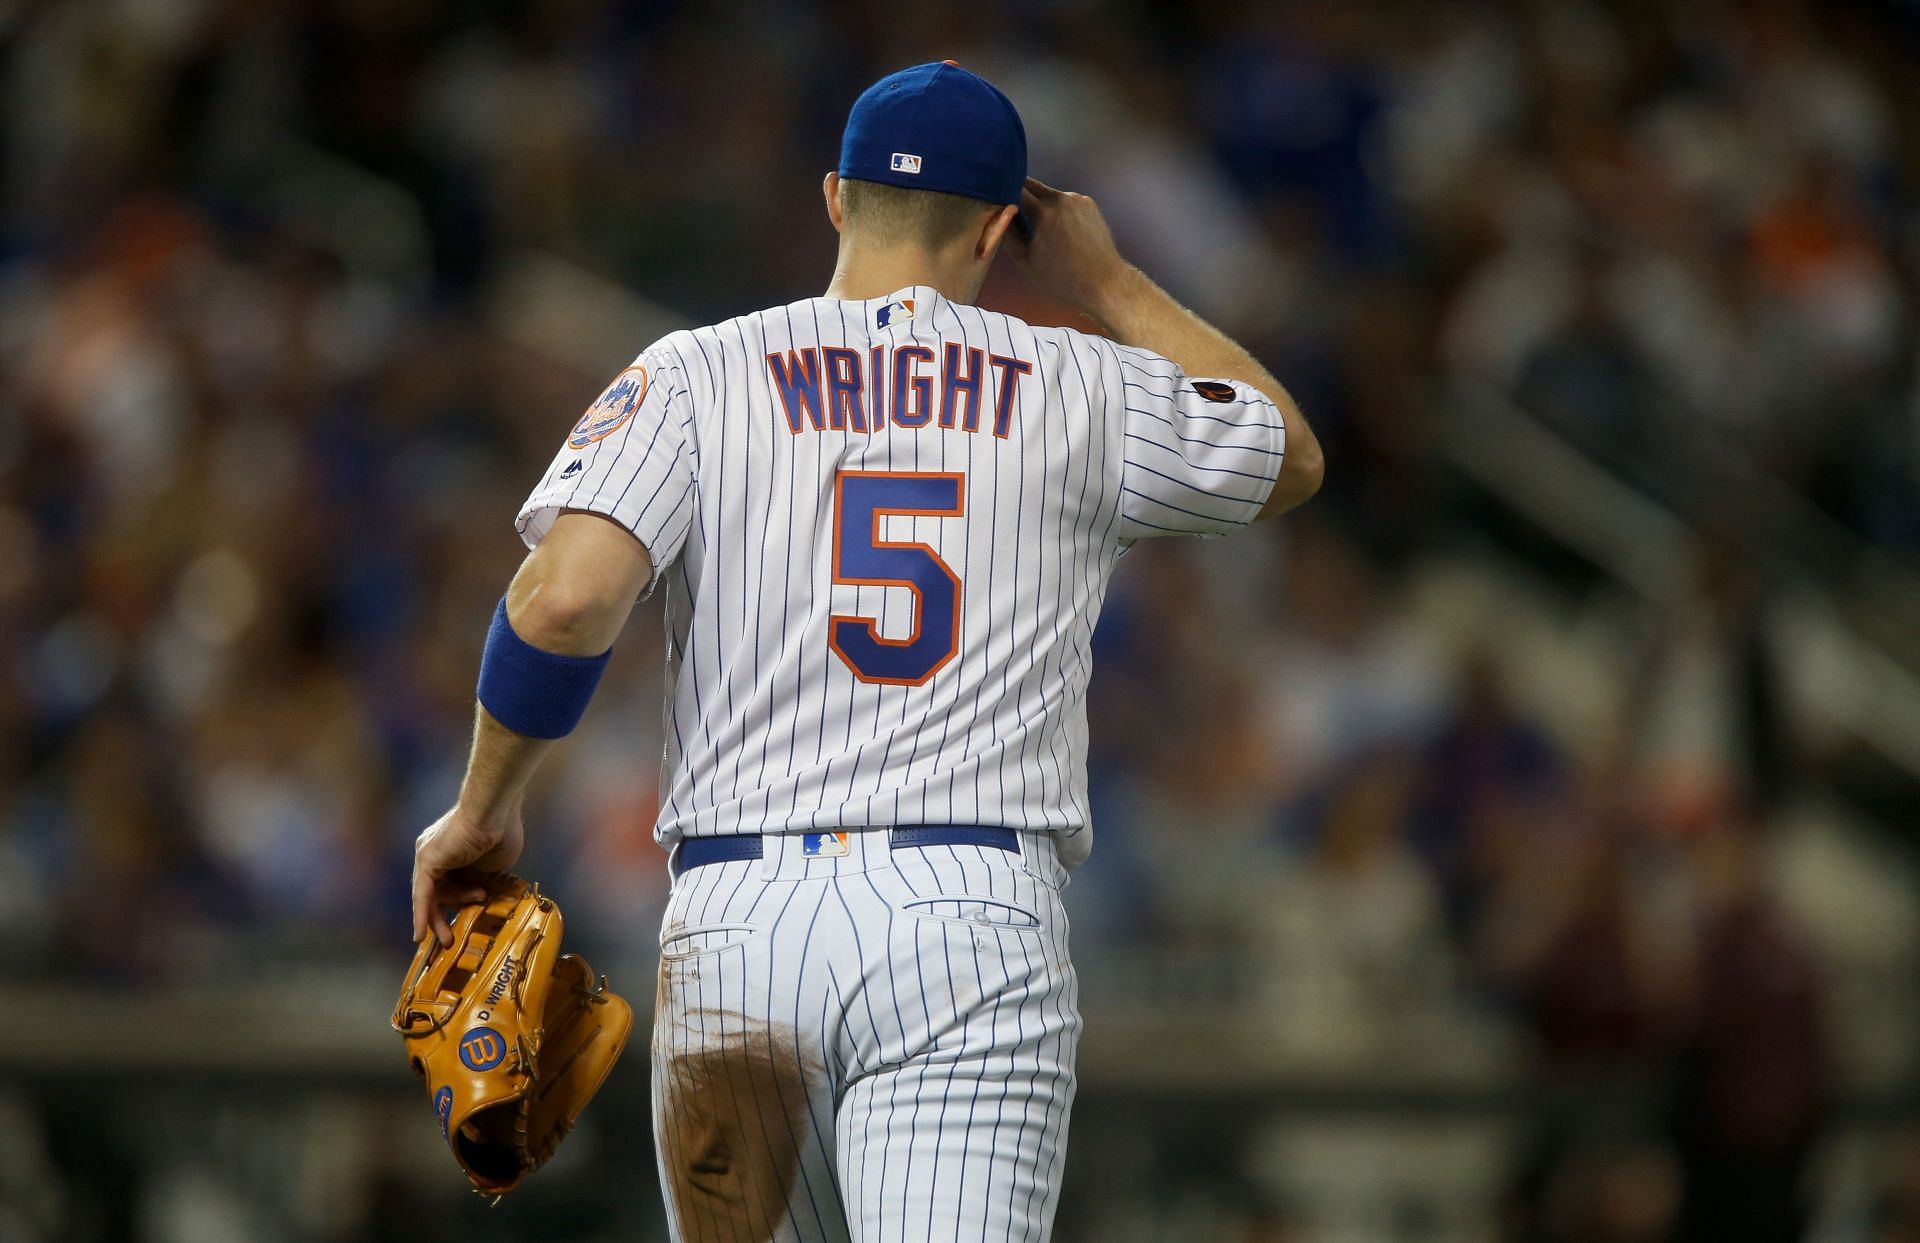 When Will The Mets Replace David Wright?